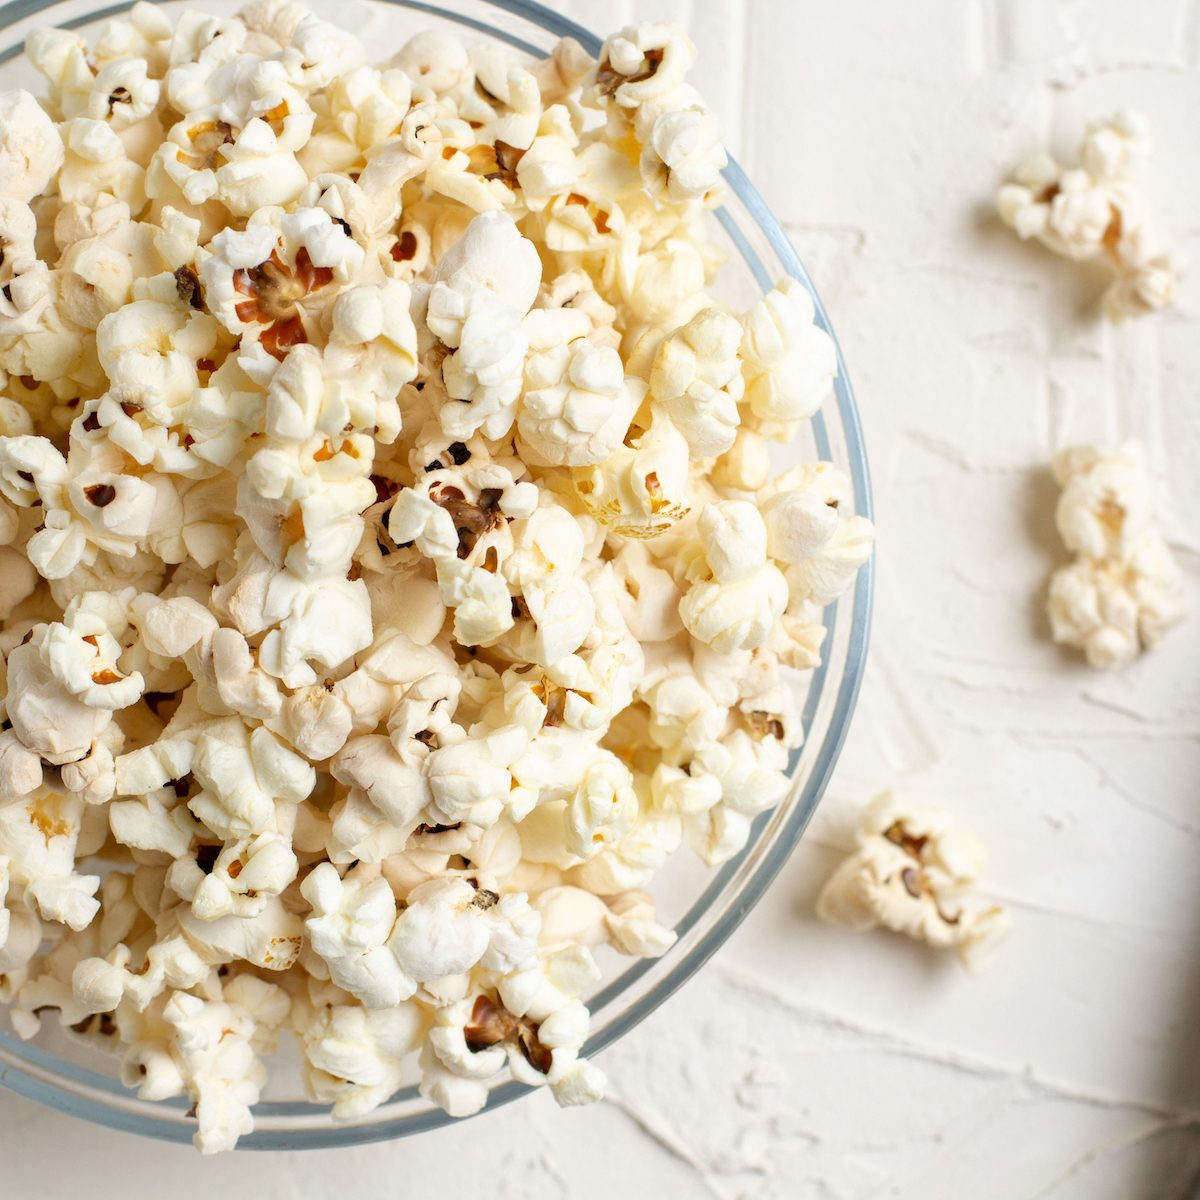 A popcorn counter can offer different flavours and toppings, making it a  hit with children at their birthday parties.